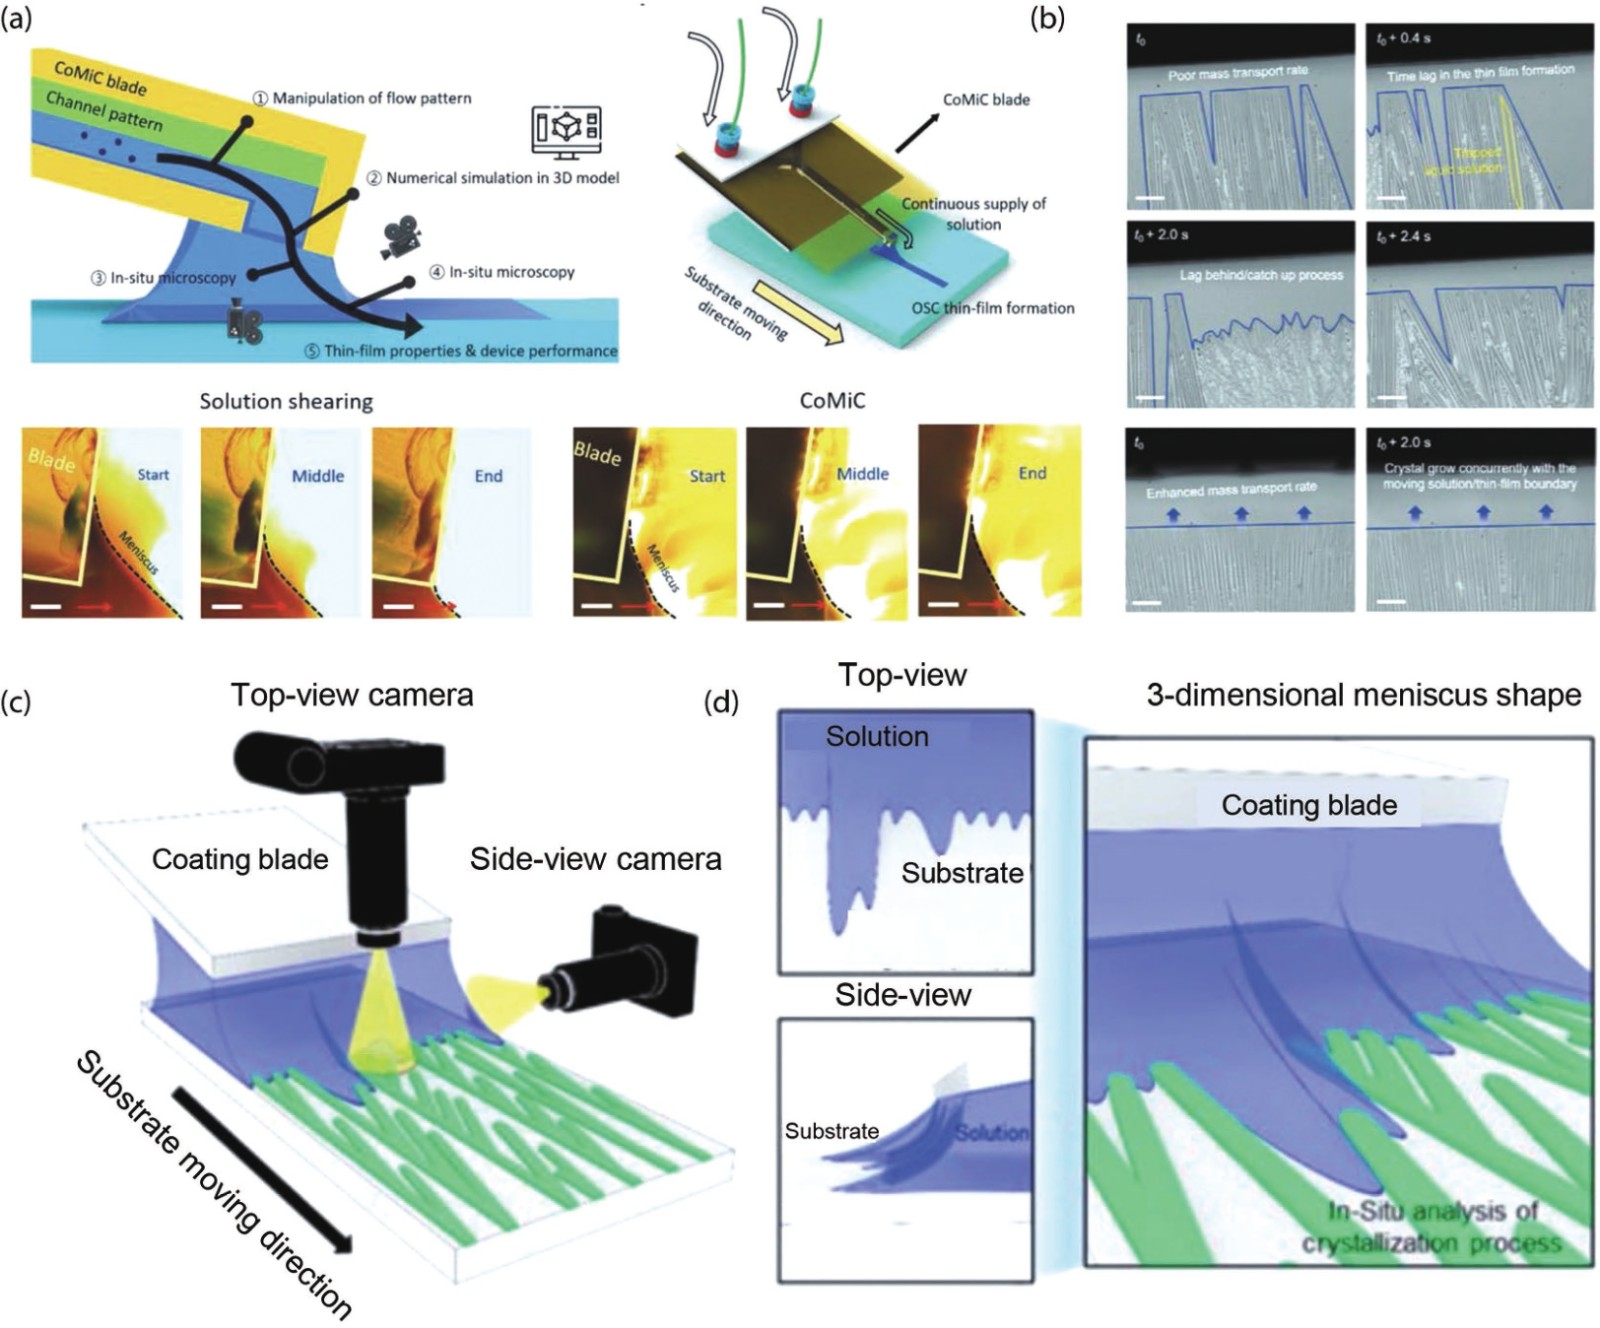 (Color online) In-situ optical microscopy for characterizations of organic crystalline films. (a) Schematic diagram of CoMiC-based analytical system along the entire flow path connecting flow pattern, crystallization, and thin-film properties (upper panel of (a)). Side-view in-situ image analysis of meniscus shape variation during the coating (lower panel of (a)). (b) In-situ microscopy images showing the variation of solution/thin-film boundary and crystallization process of doped TIPS-pentacene using the FM-CoMiC and the SHM-CoMiC[22]. (c) Schematic diagram of top-view and side-view in-situ microscopy to investigate the relationship between 3D meniscus geometry and crystallization during solution shearing. (d) The top-, side-, and 3D-view microscopies for the visualization of the contact line/crystallization process and cross-sectional meniscus shape[34].